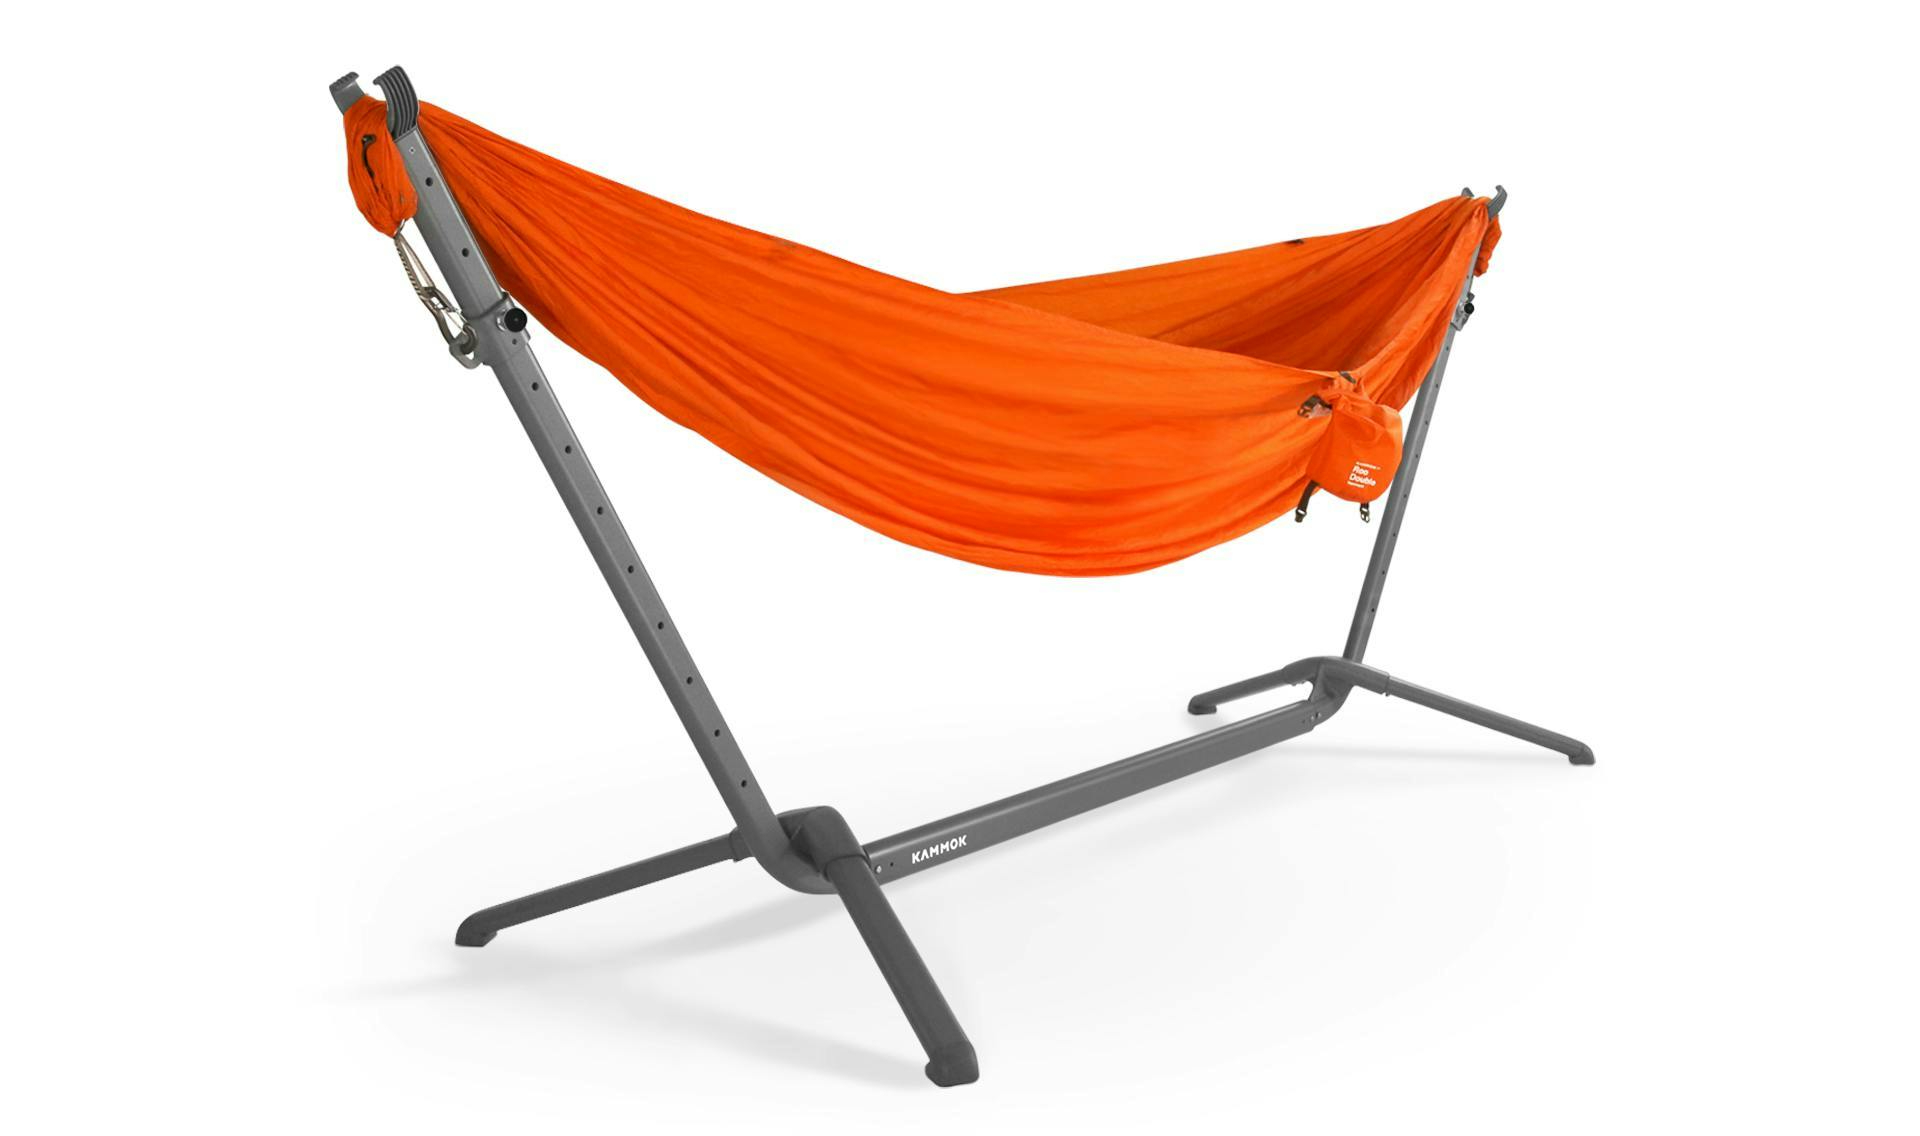 Kammok hammock stand set up to show it with a hammock